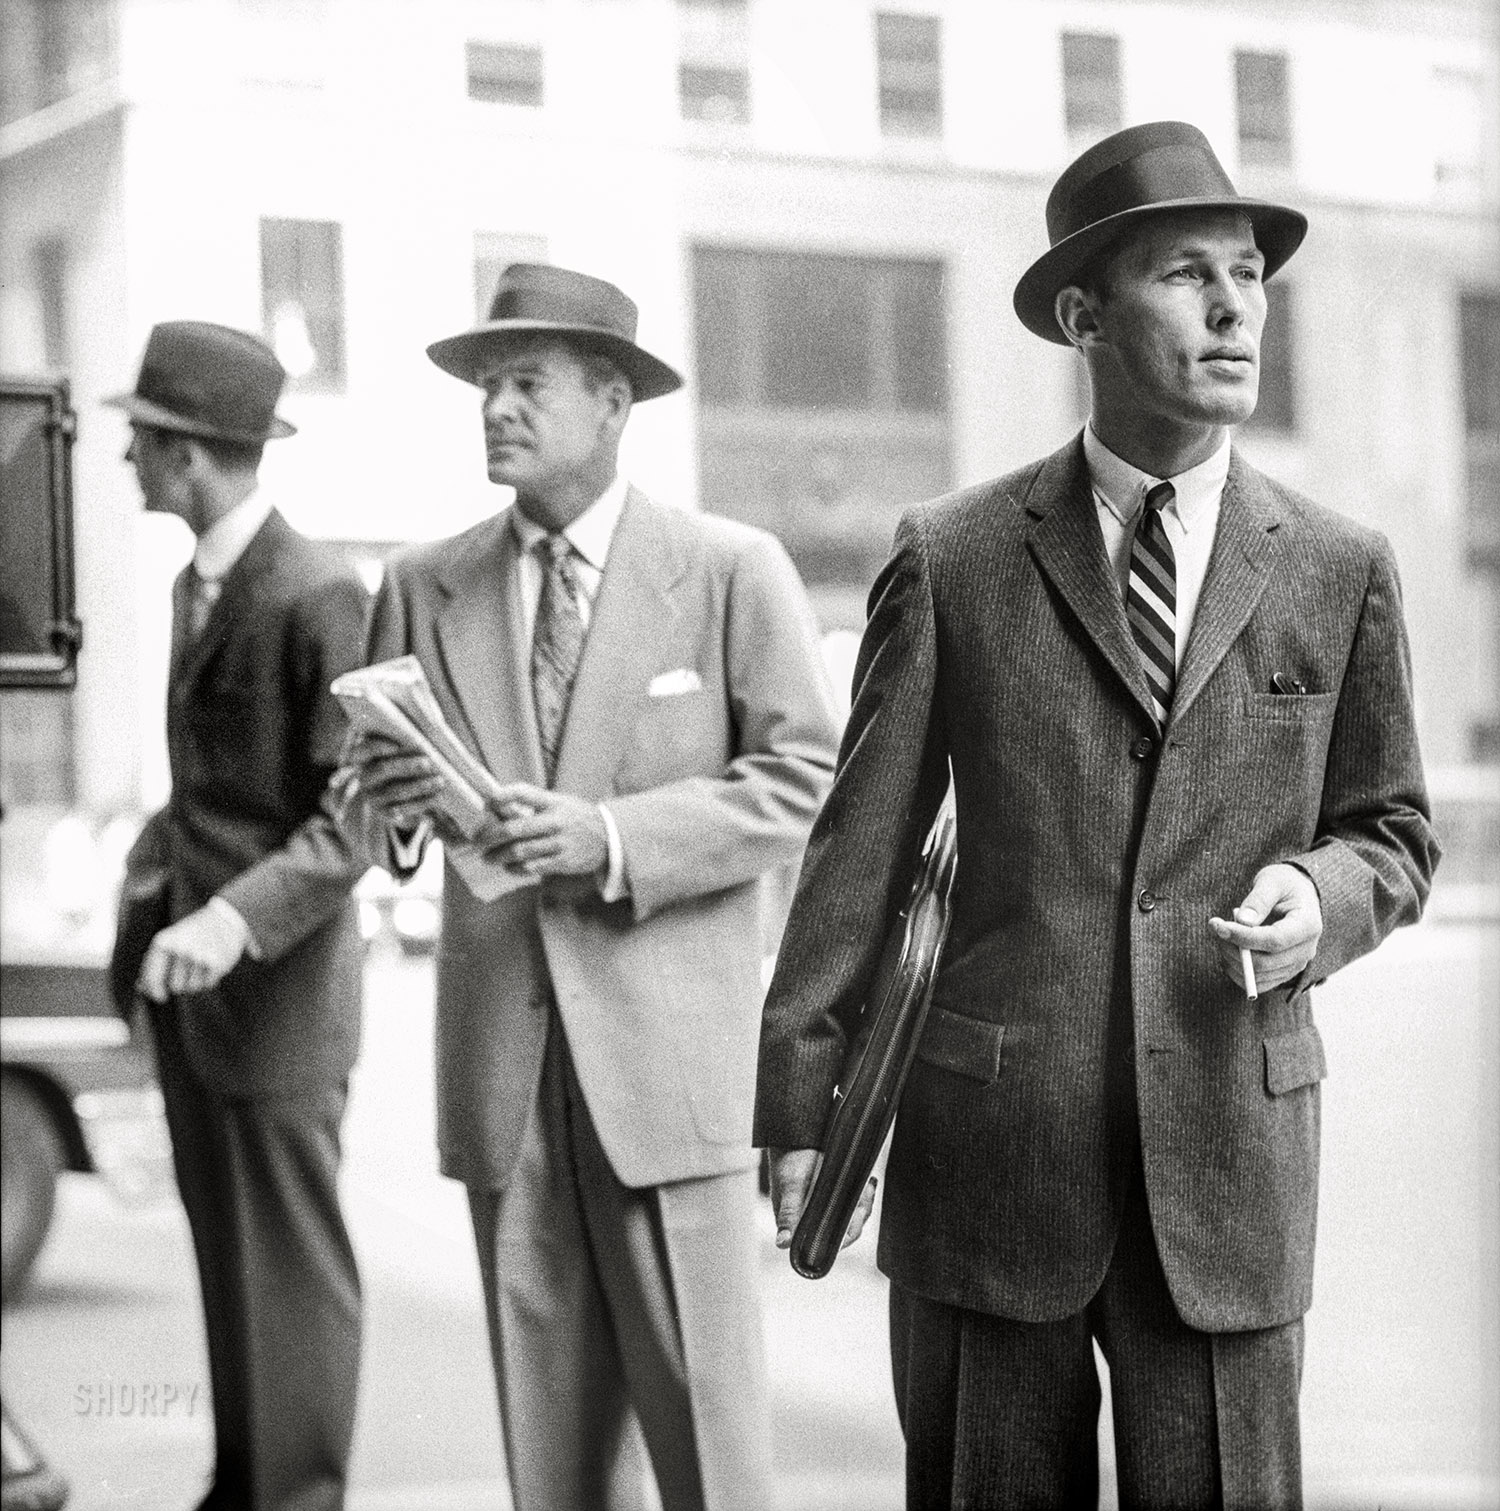 August 1957. New York. "Up-to-date wardrobe -- men's fashions." Medium format negative from photos for the Look magazine assignment "Is Your Wardrobe Up-to-Date?" View full size.